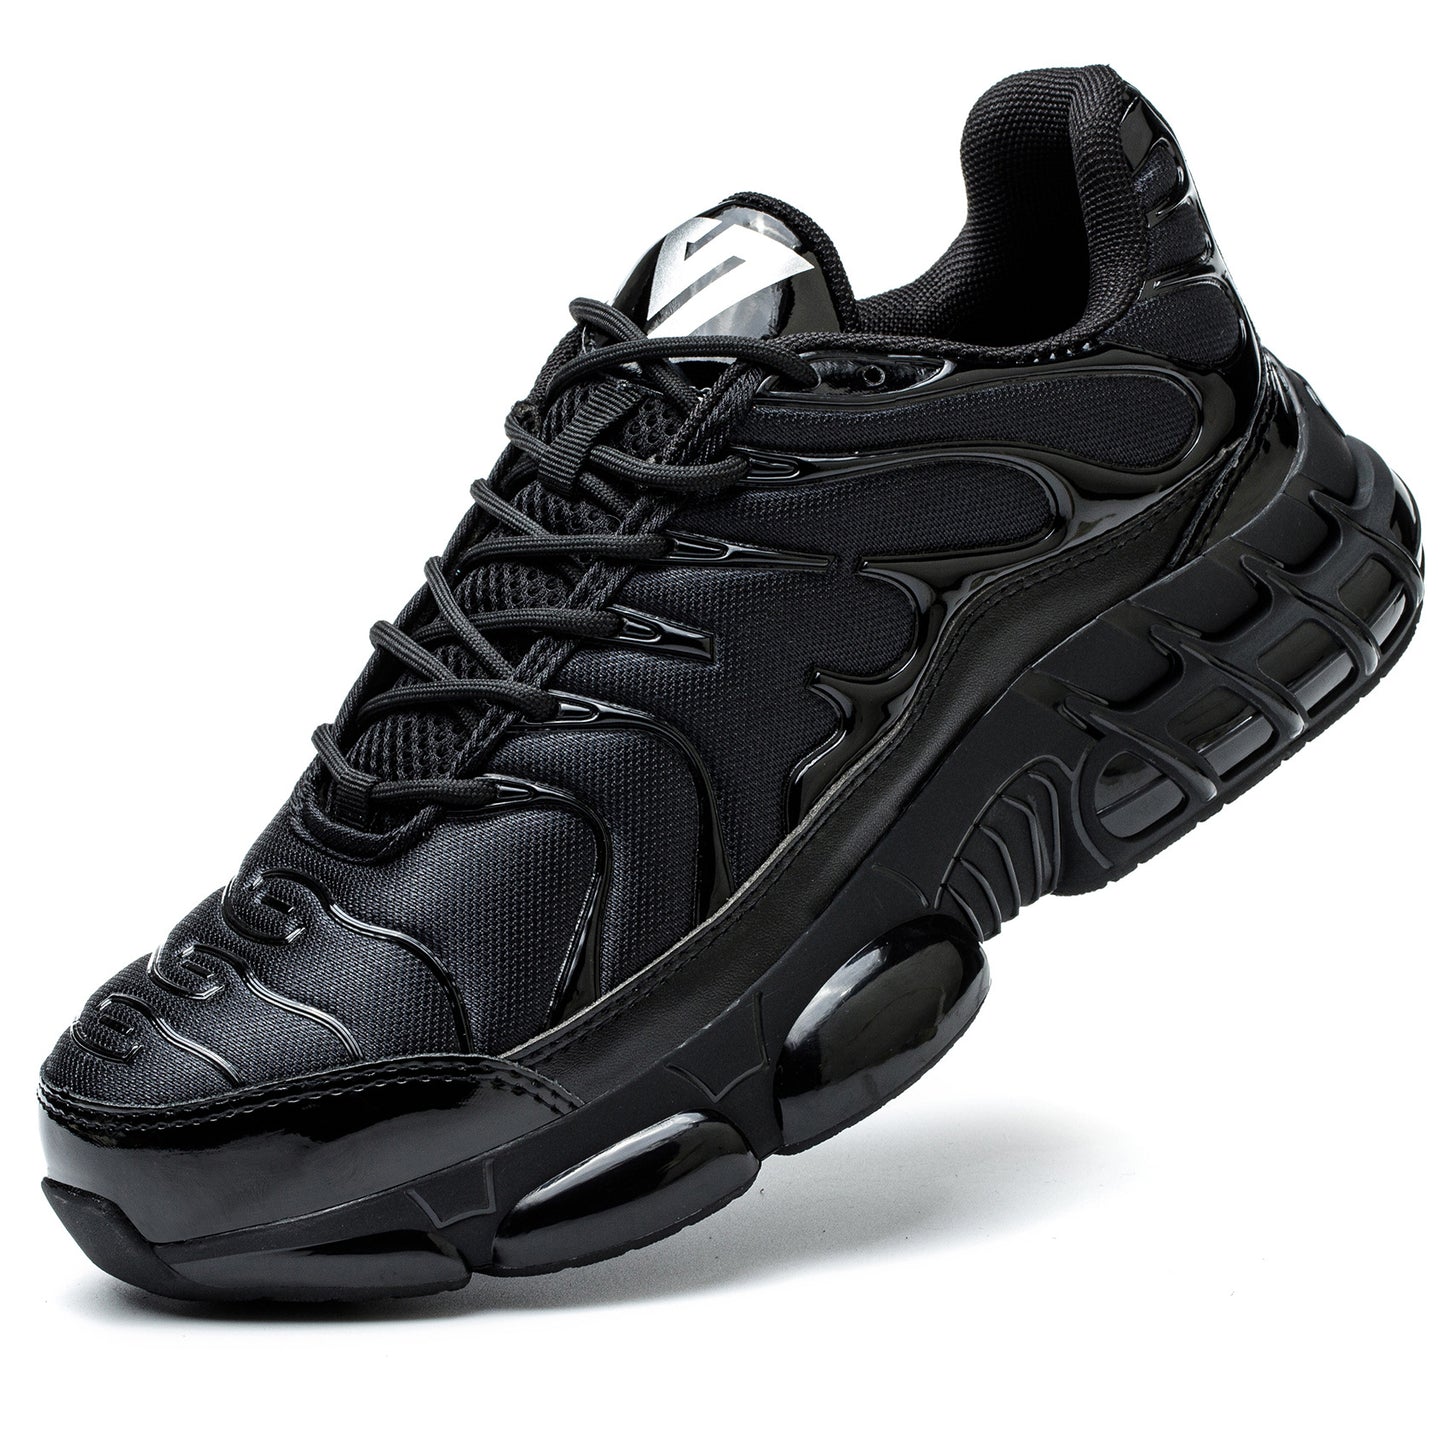 Men's sneakers with protection